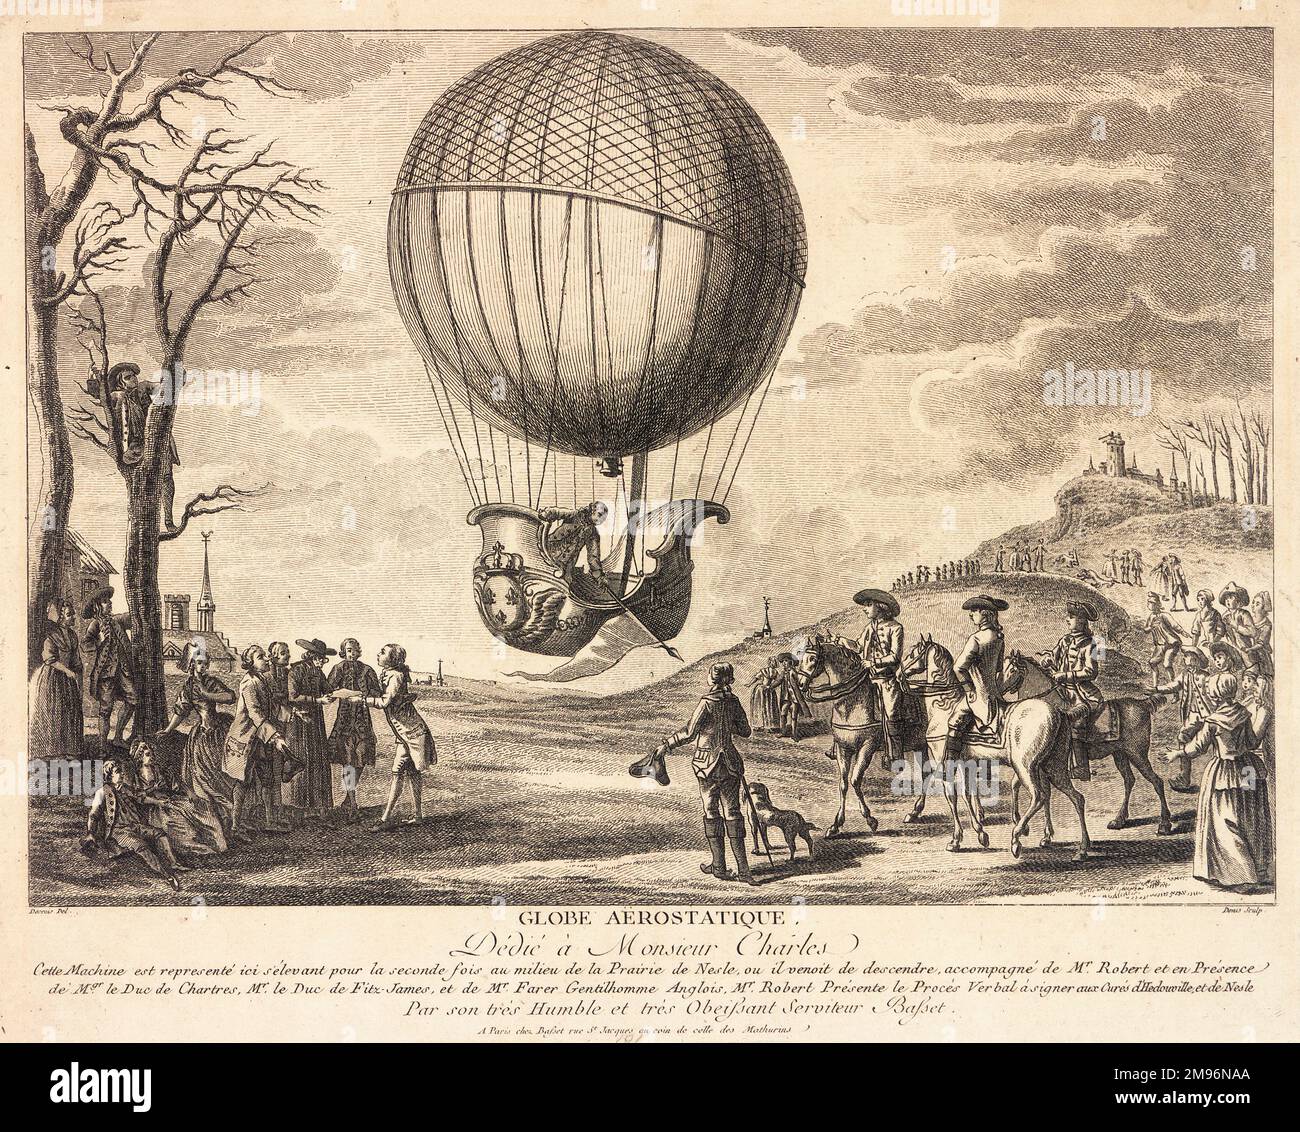 Balloon ascent by M Charles from the Prairie de Nesle, northern France, where it had landed after taking off from the Tuileries Gardens, Paris, on 1 December 1783.  Seen here ascending for the second time.  M Robert, who accompanied Charles from Paris, can be seen on the ground (left), taking witness statements.  It was the first hydrogen balloon flight. Stock Photo